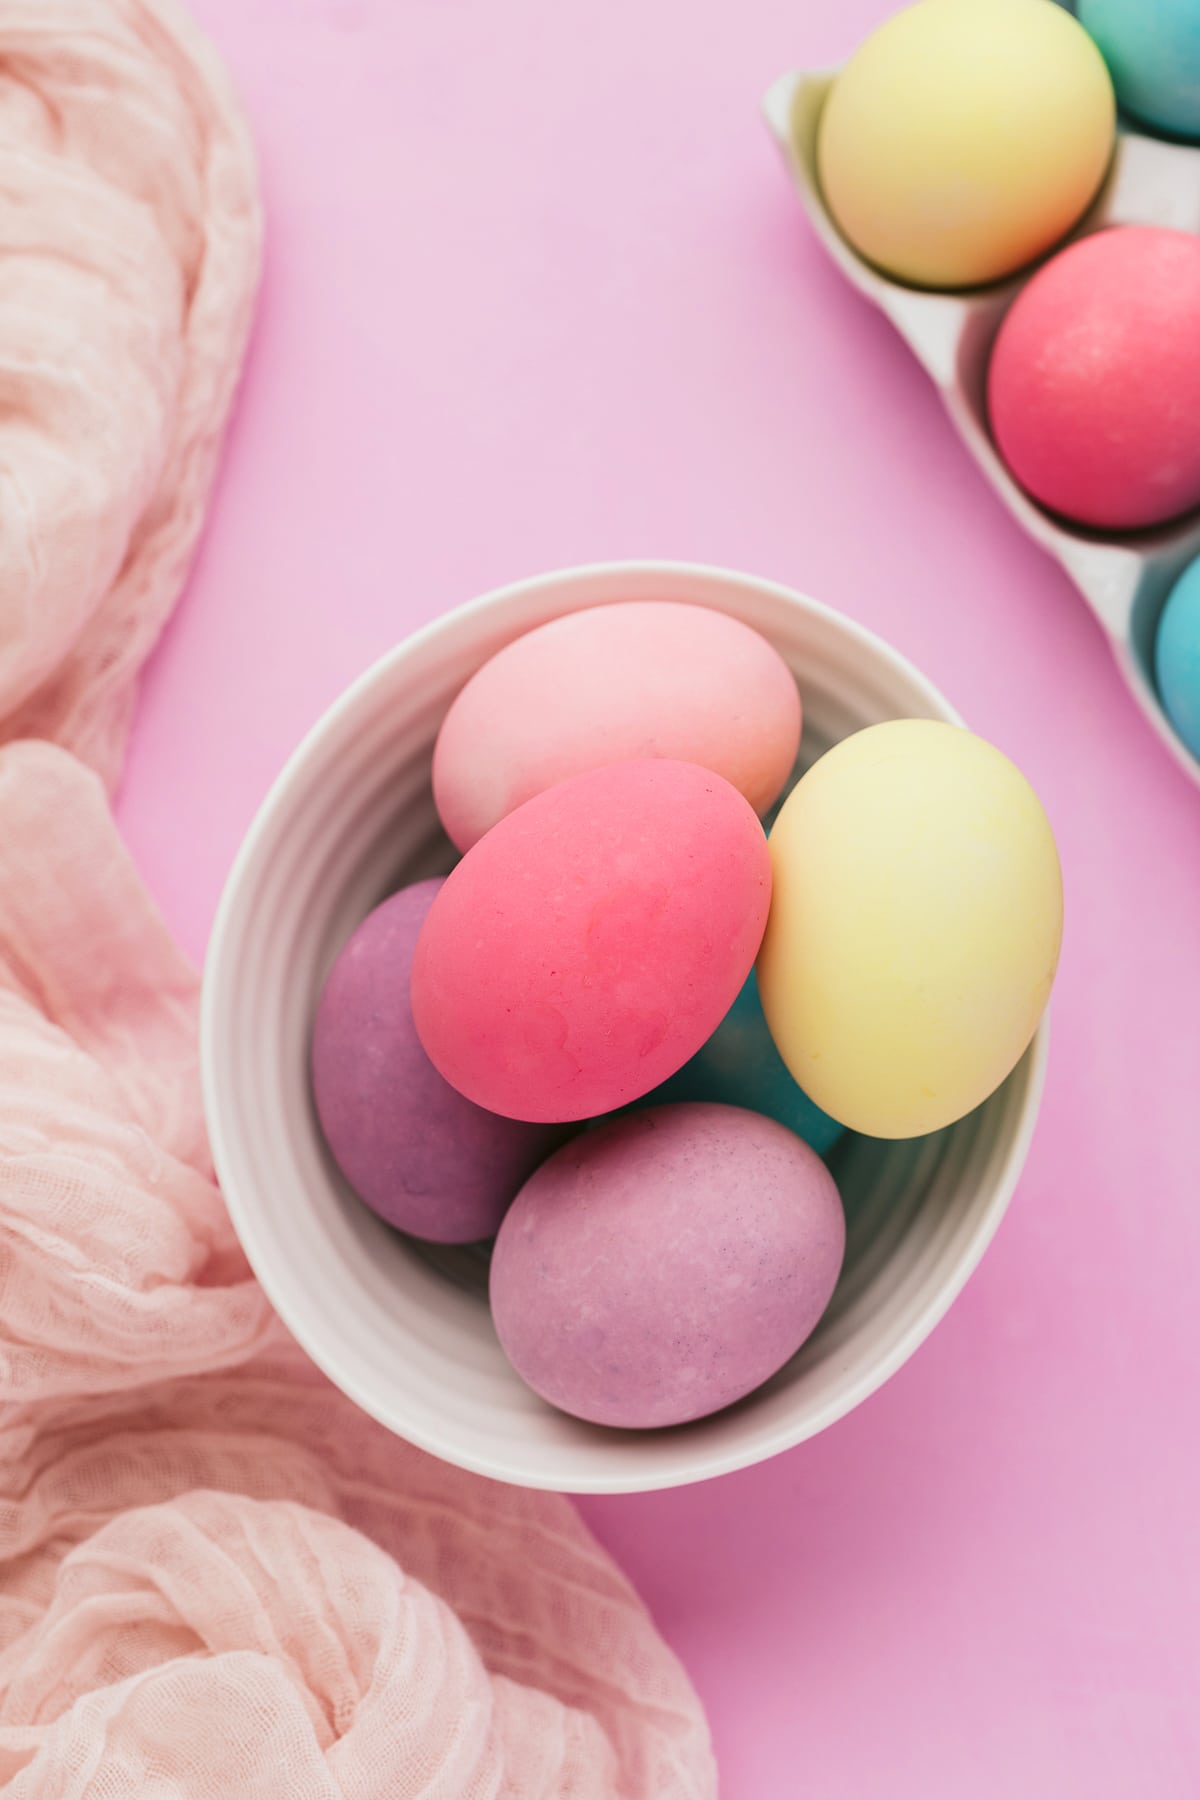 Colorful Easter eggs in a bowl on purple background with pink fabric